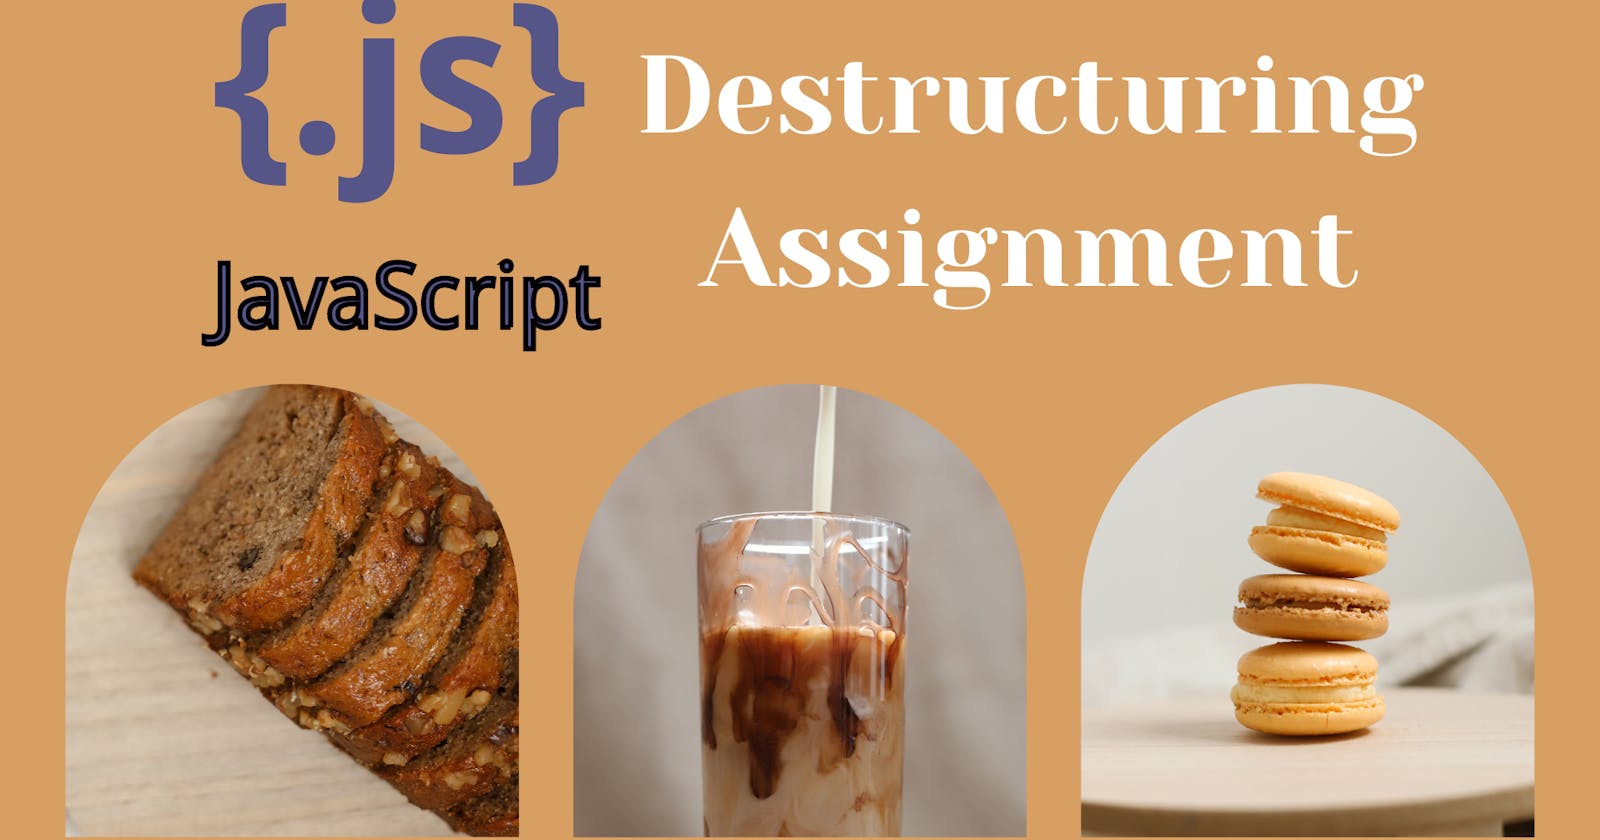 Destructuring Assignment in JavaScript